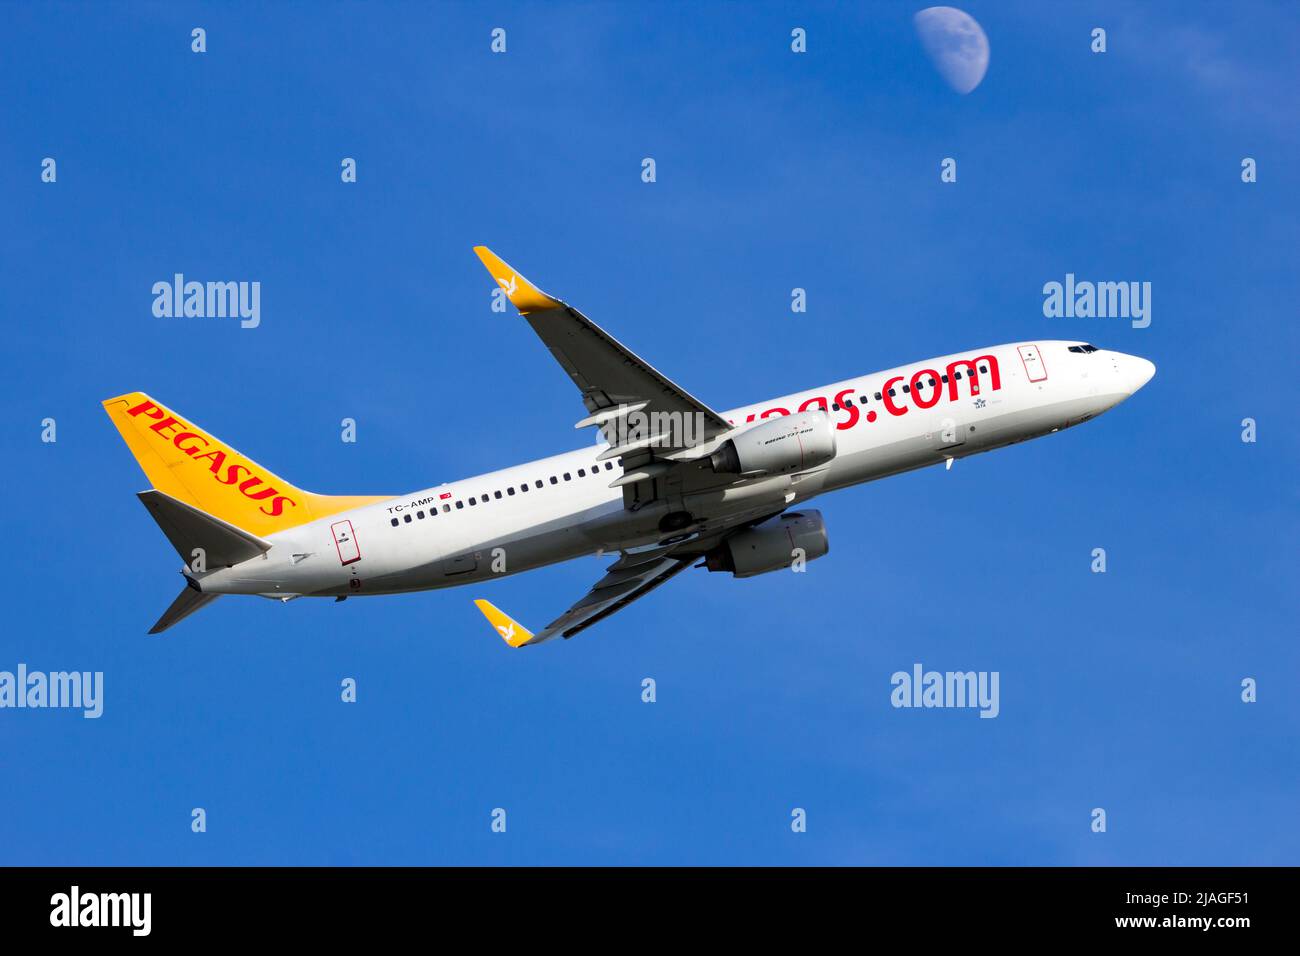 Pegasus Airlines Boeing 737 airplane take-off from Amsterdam Schiphol International Airport. The Netherlands - February 16, 2016 Stock Photo